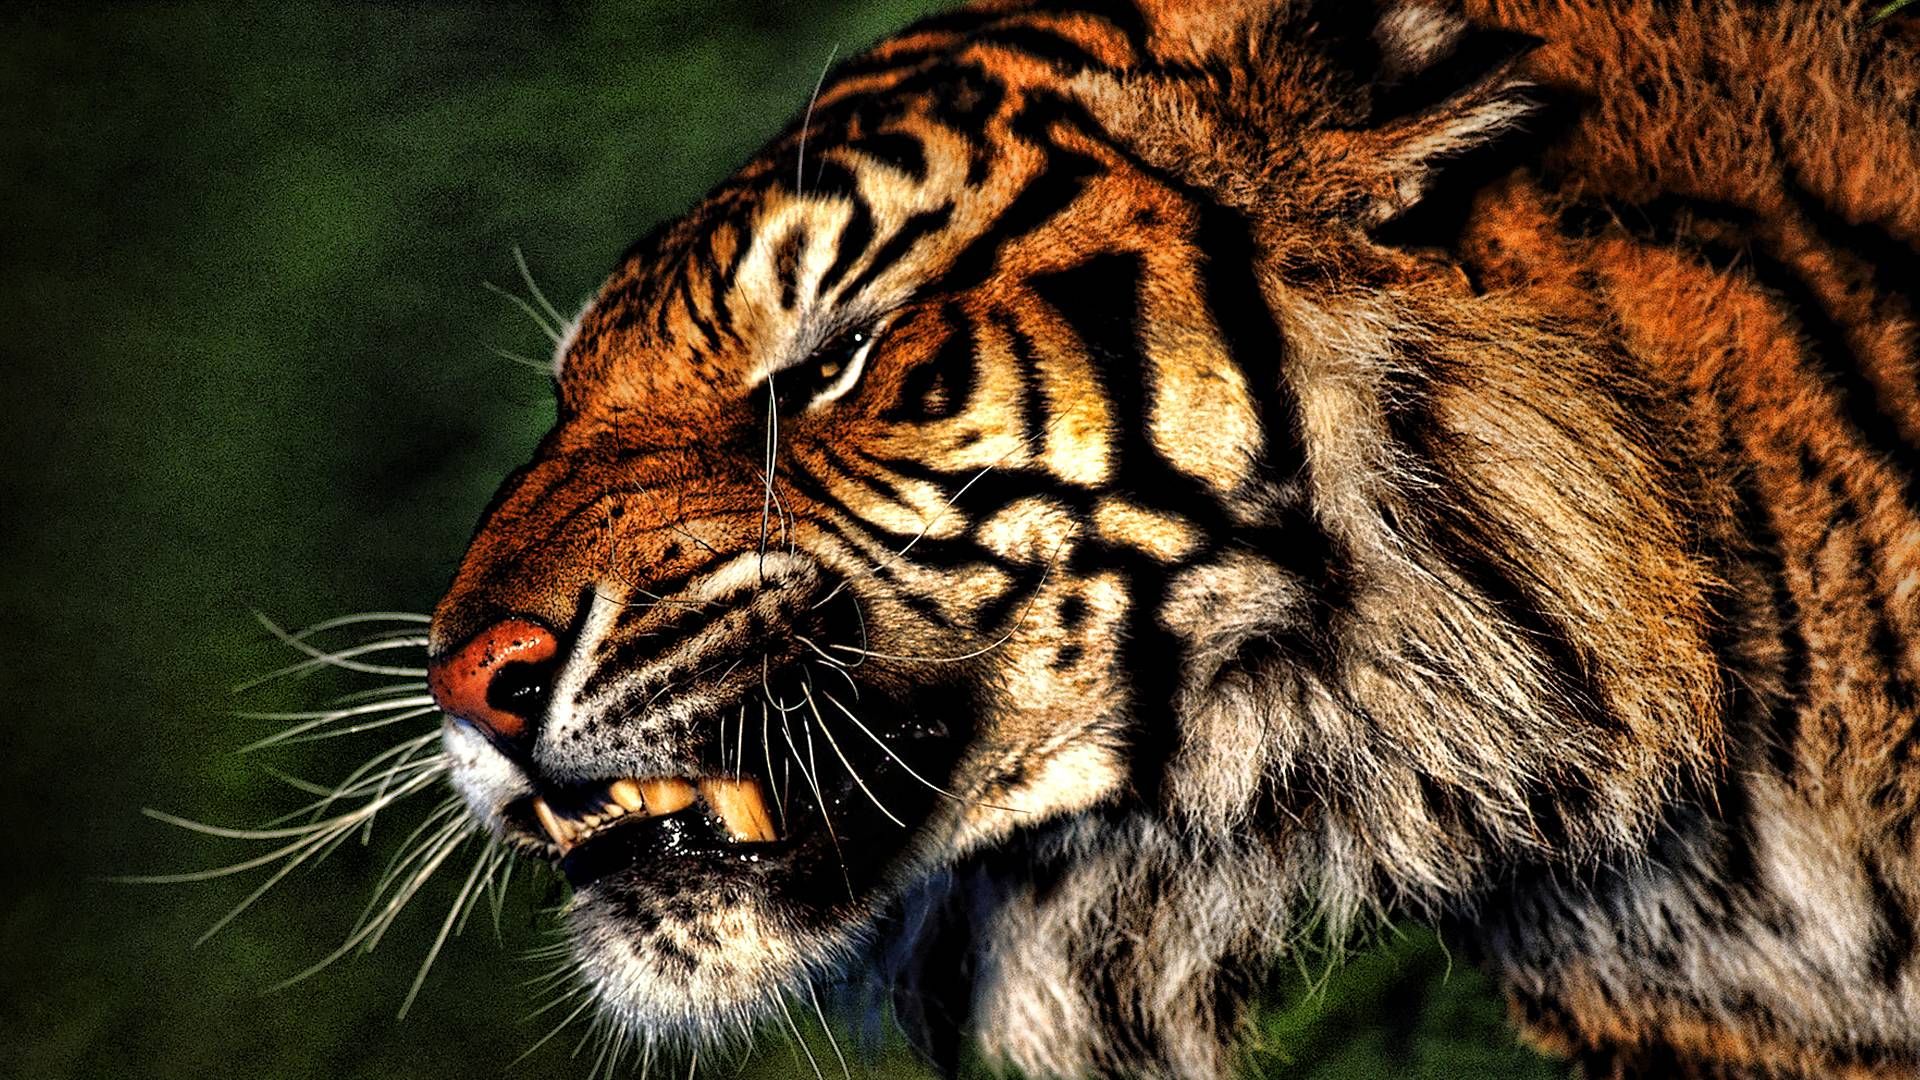 Free Download Tiger Hd Wallpapers Epic Car Wallpapers In X For Your Desktop